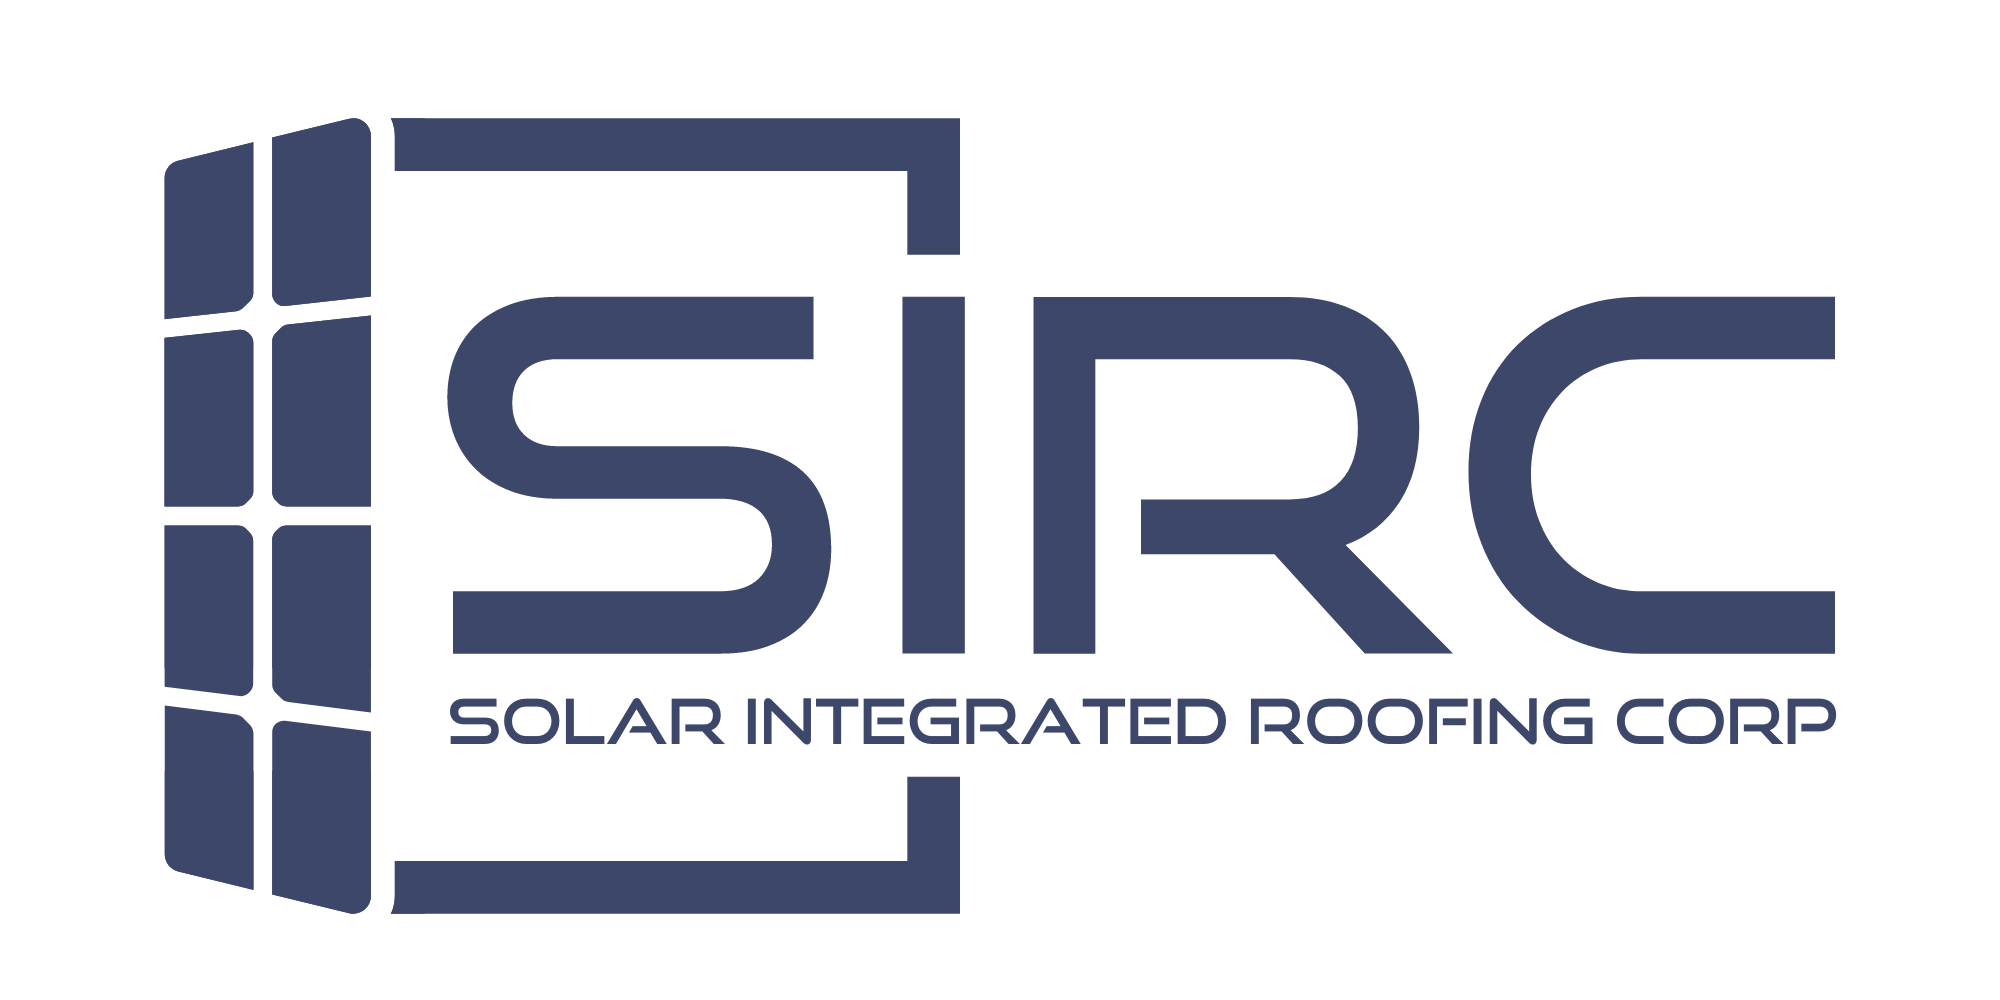 Solar Integrated Roofing Corp. Provides Corporate and